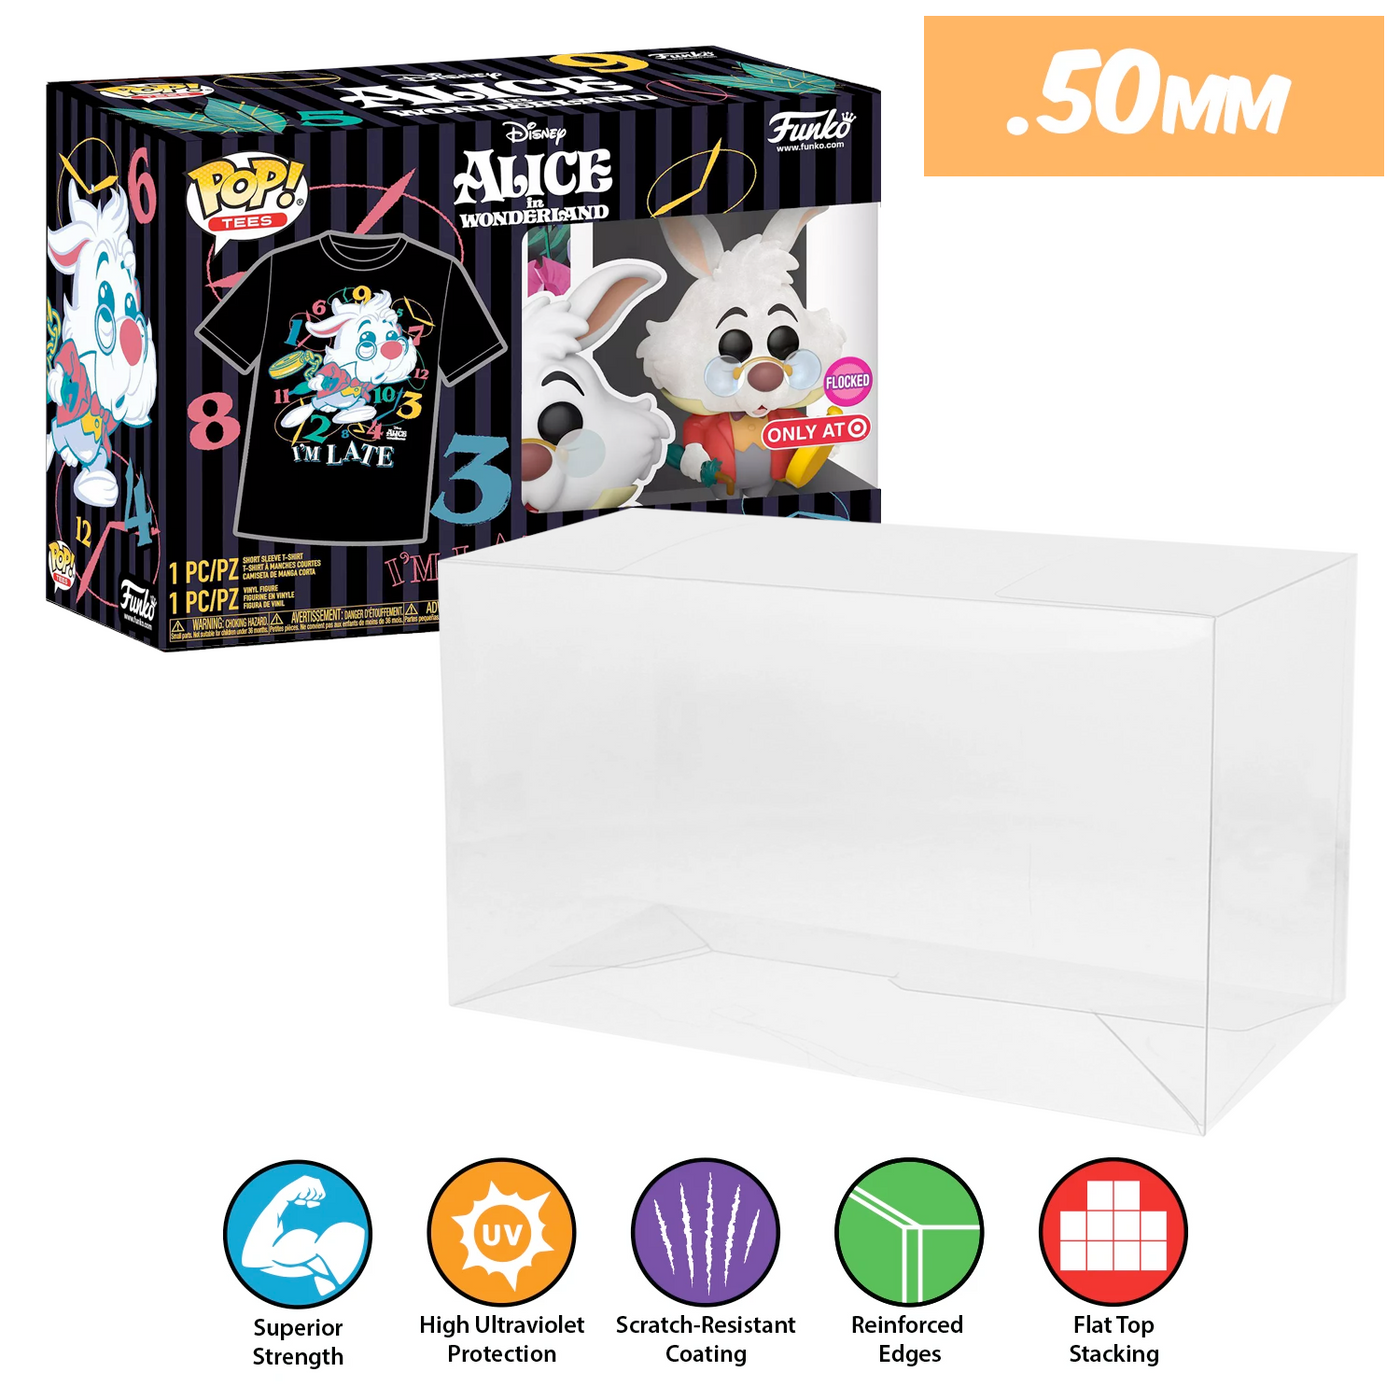 pop & tee alice in wonderland rabbit flocked best funko pop protectors thick strong uv scratch flat top stack vinyl display geek plastic shield vaulted eco armor fits collect protect display case kollector protector